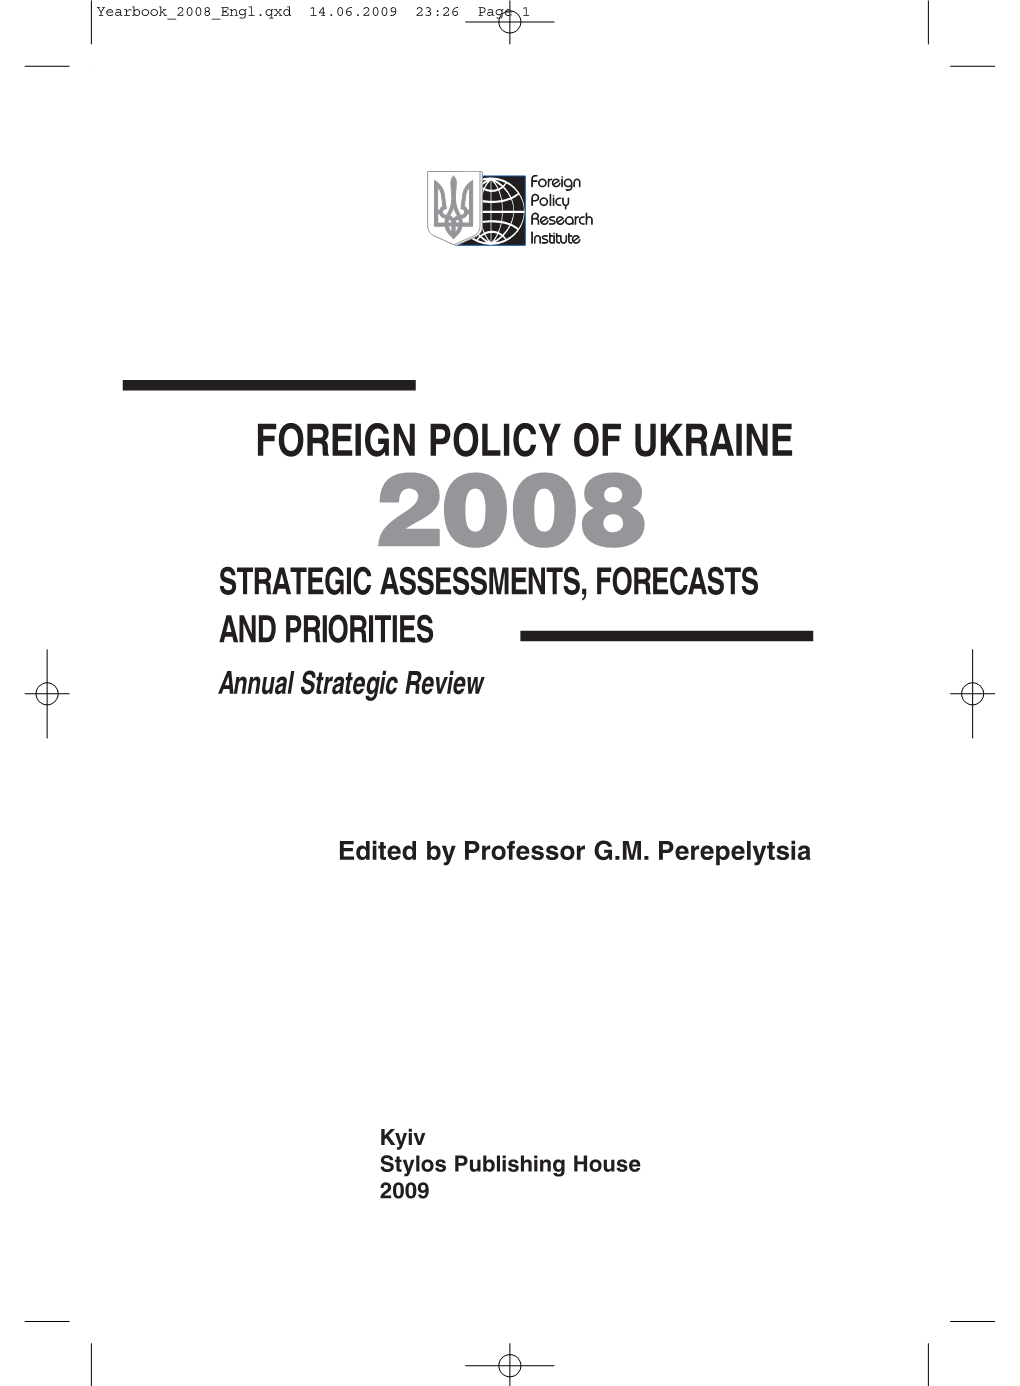 FOREIGN POLICY of UKRAINE 2008 STRATEGIC ASSESSMENTS, FORECASTS and PRIORITIES Annual Strategic Review